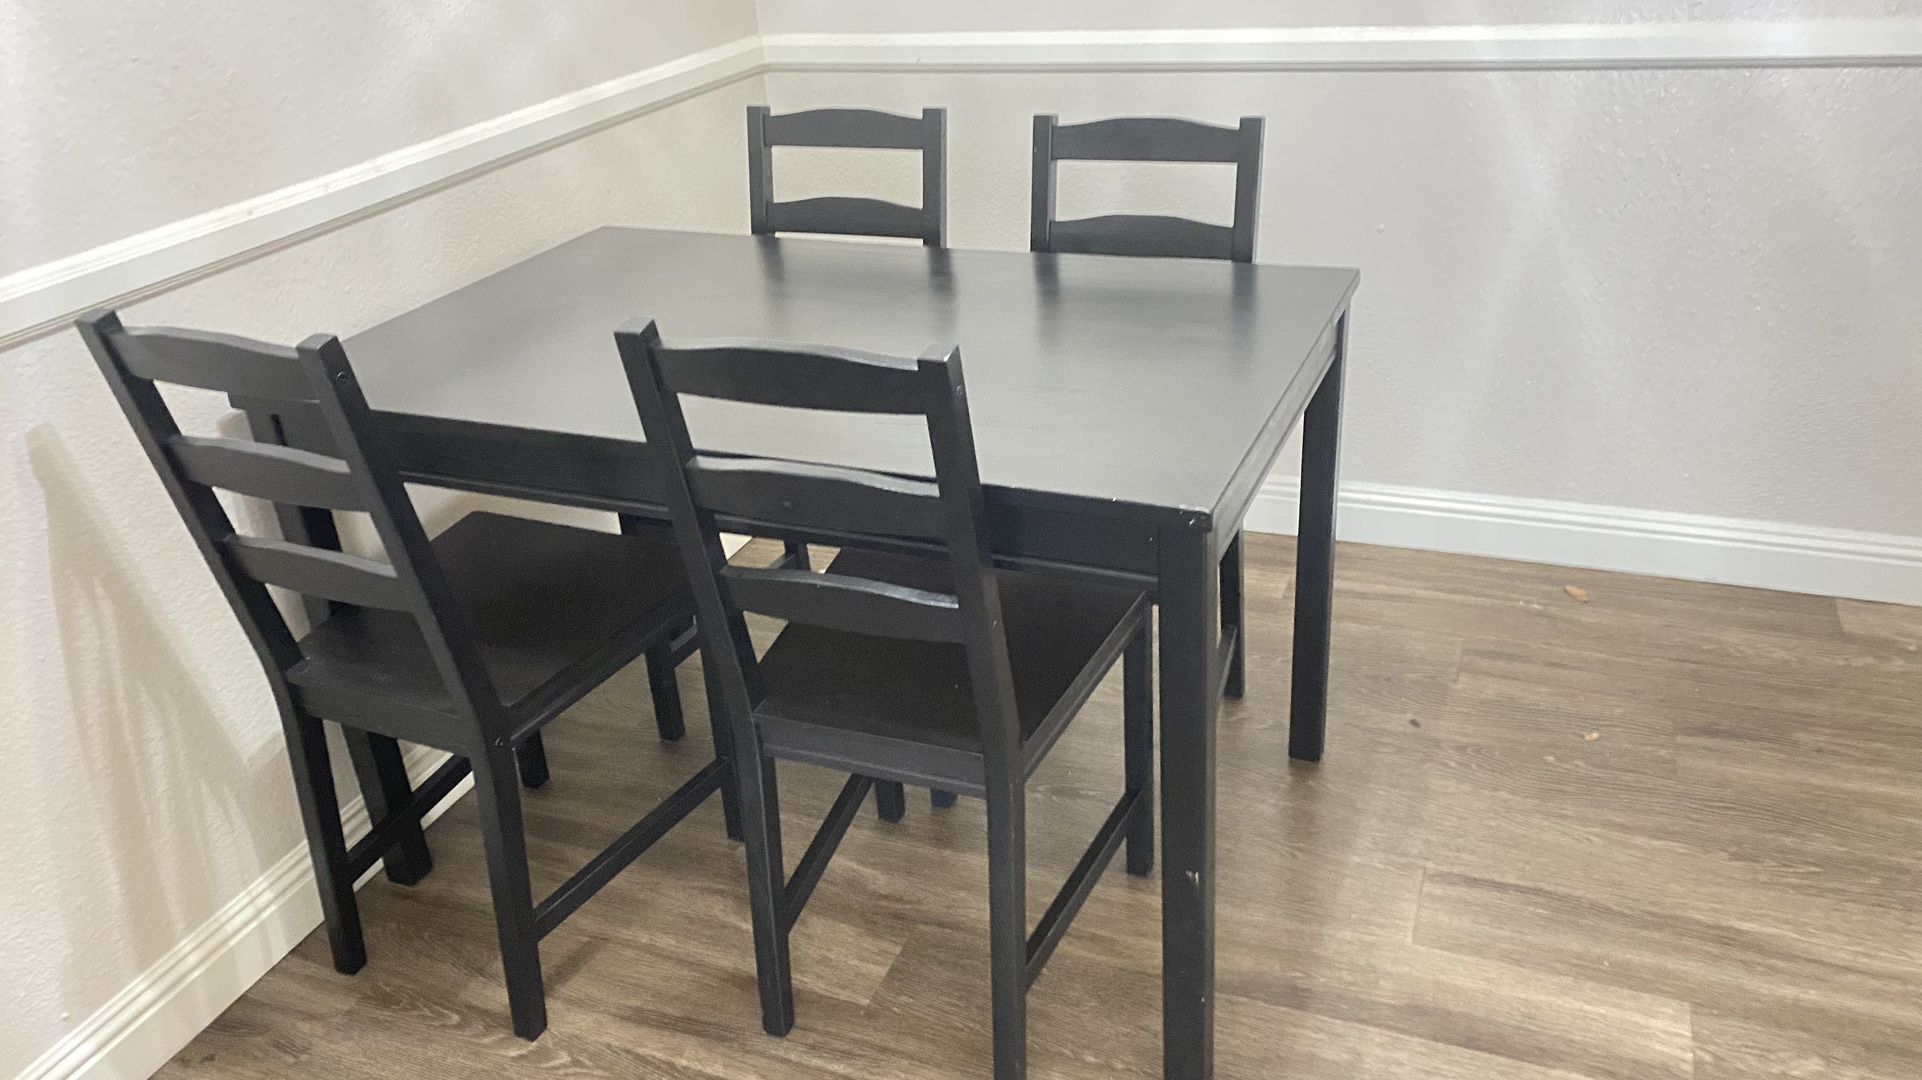 Table with 4 Chairs Balck